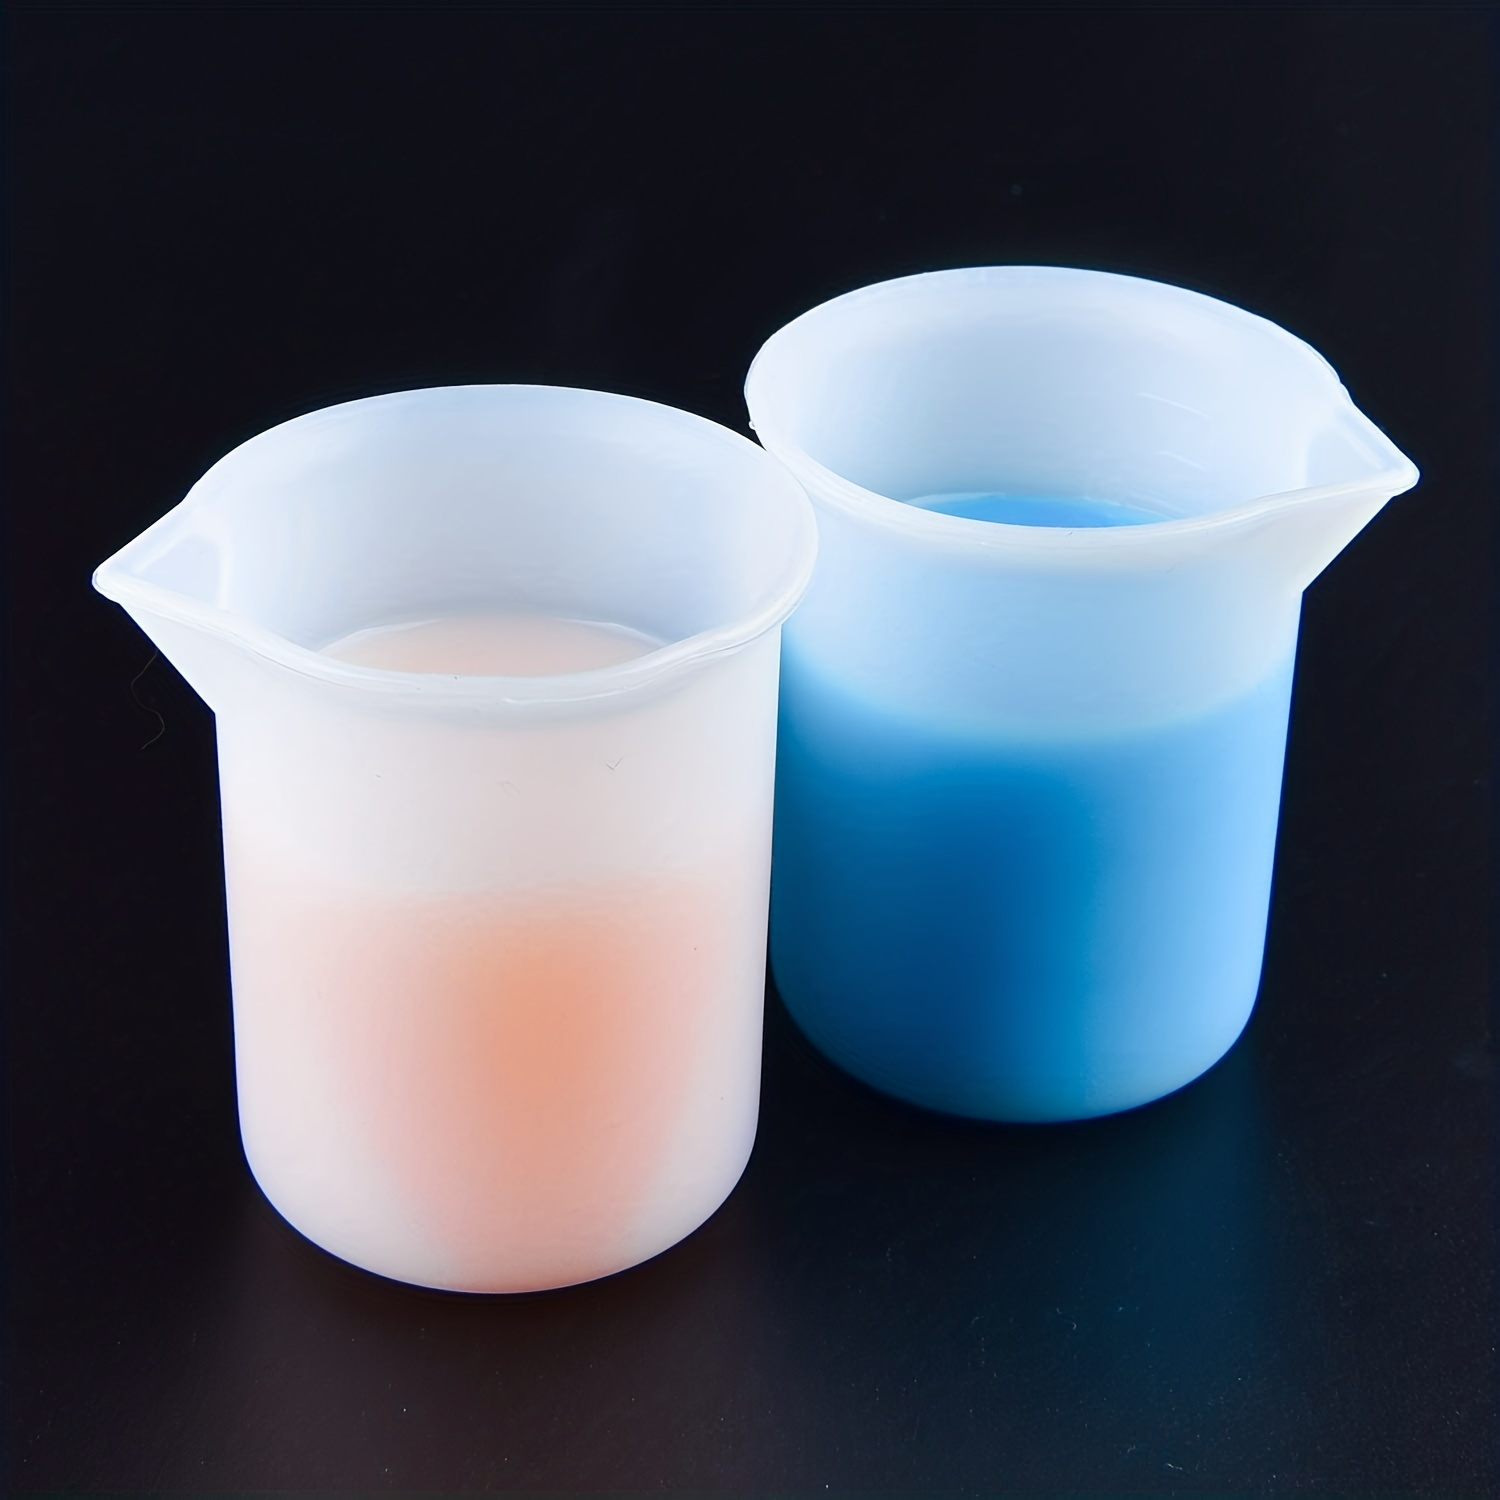 Silicone Resin Measuring Cups Tool Kit, Non-Stick Large Silicone Bowls for  Epoxy Resin, Reusable 600&100ml Silicone Mixing Cup with Stir Sticks